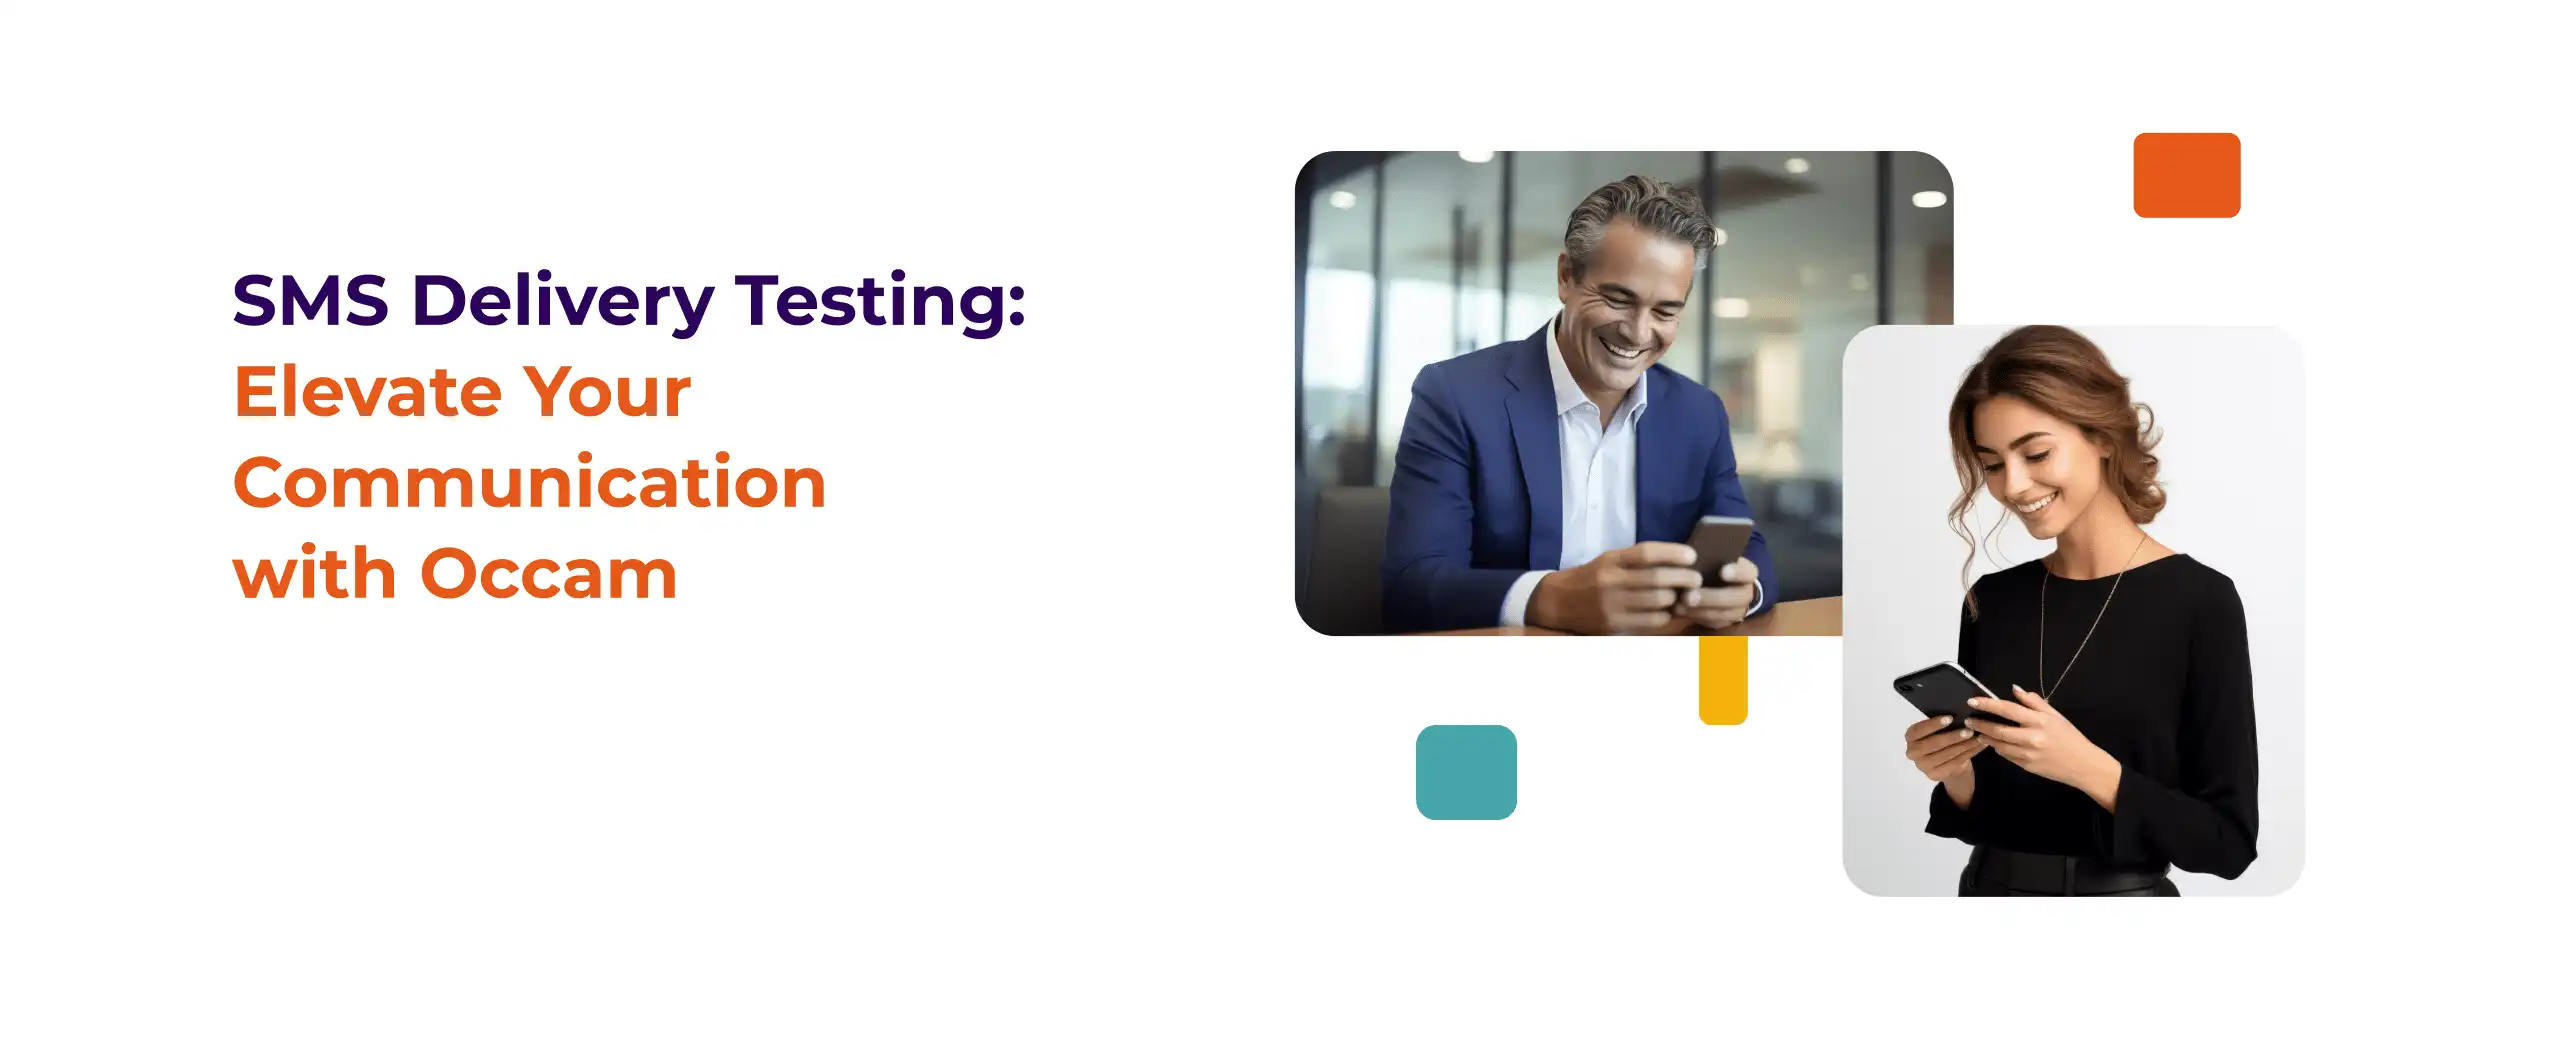 A promotional banner for SMS Delivery Testing by Occam, featuring a happy man and woman each using a smartphone.